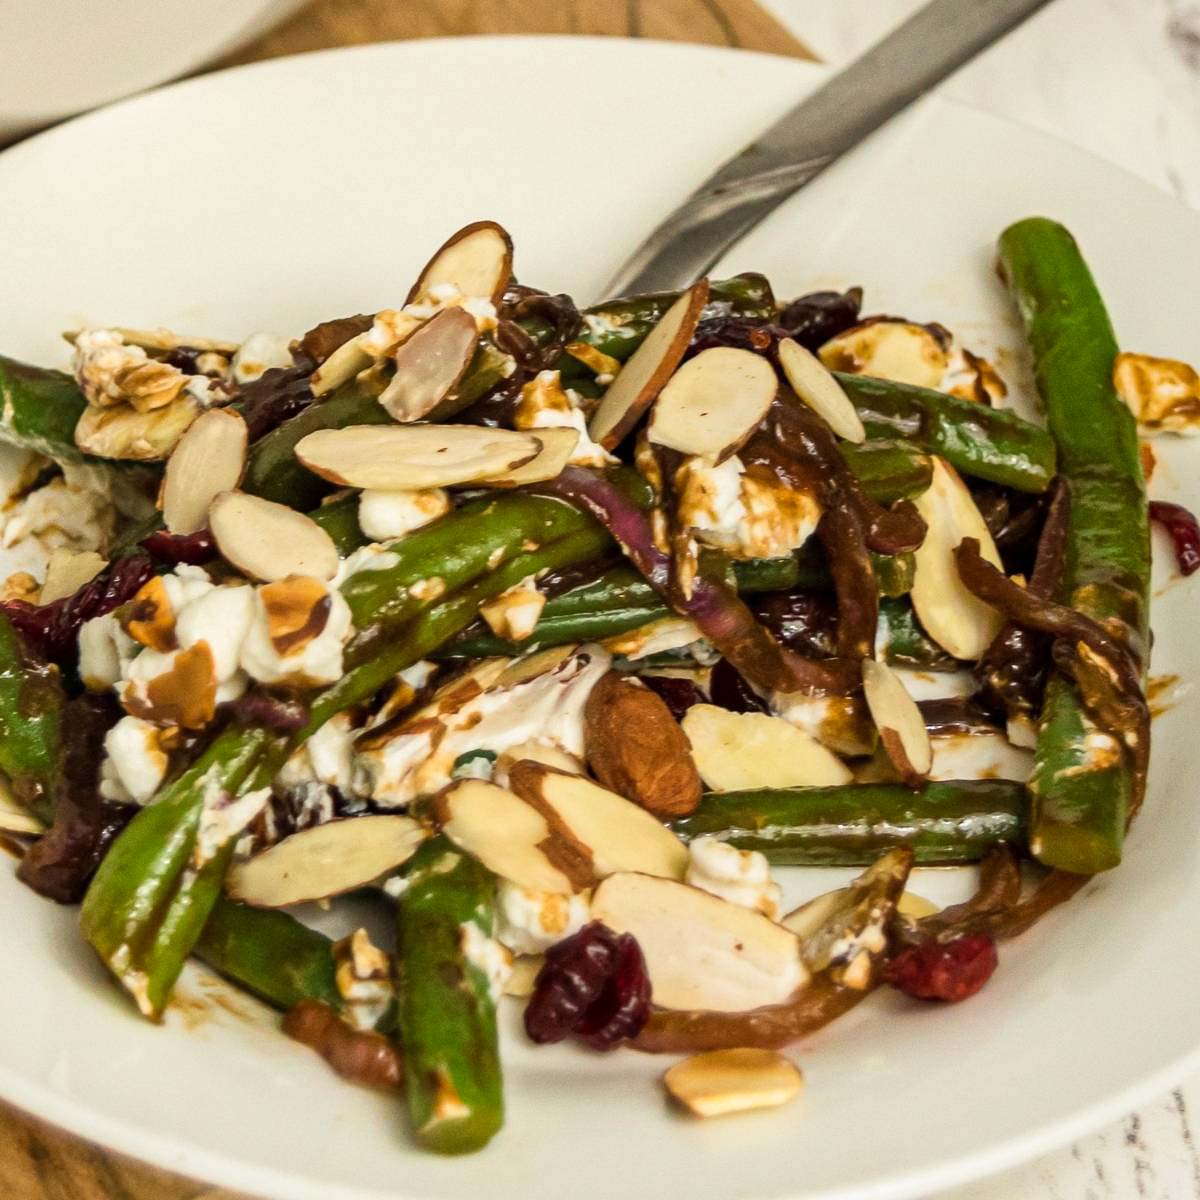 Plate of green beans with sliced almonds, dried cranberries, and balsamic sauce.